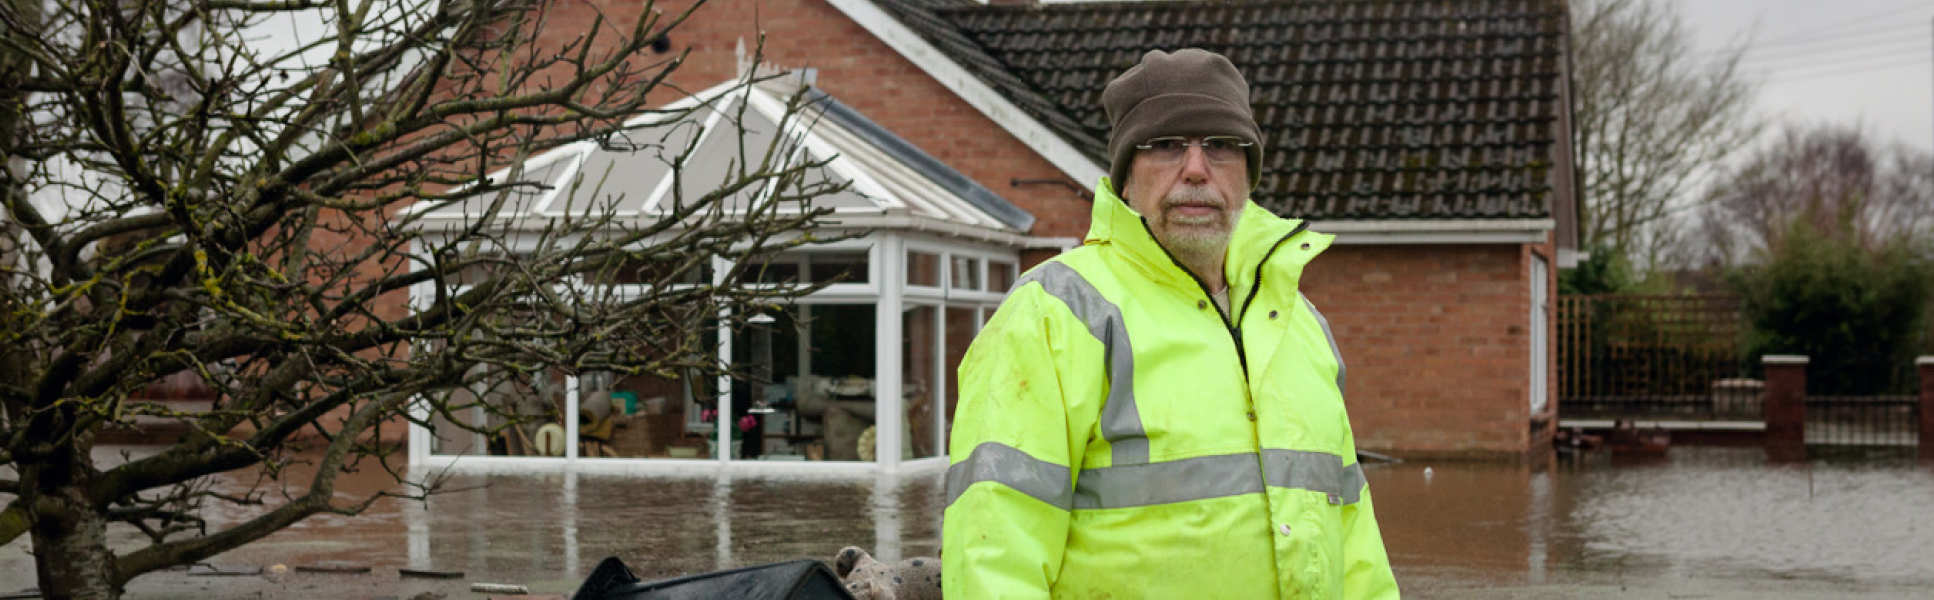 man in high viz standing thigh deep in flooded surroundings with house behind him